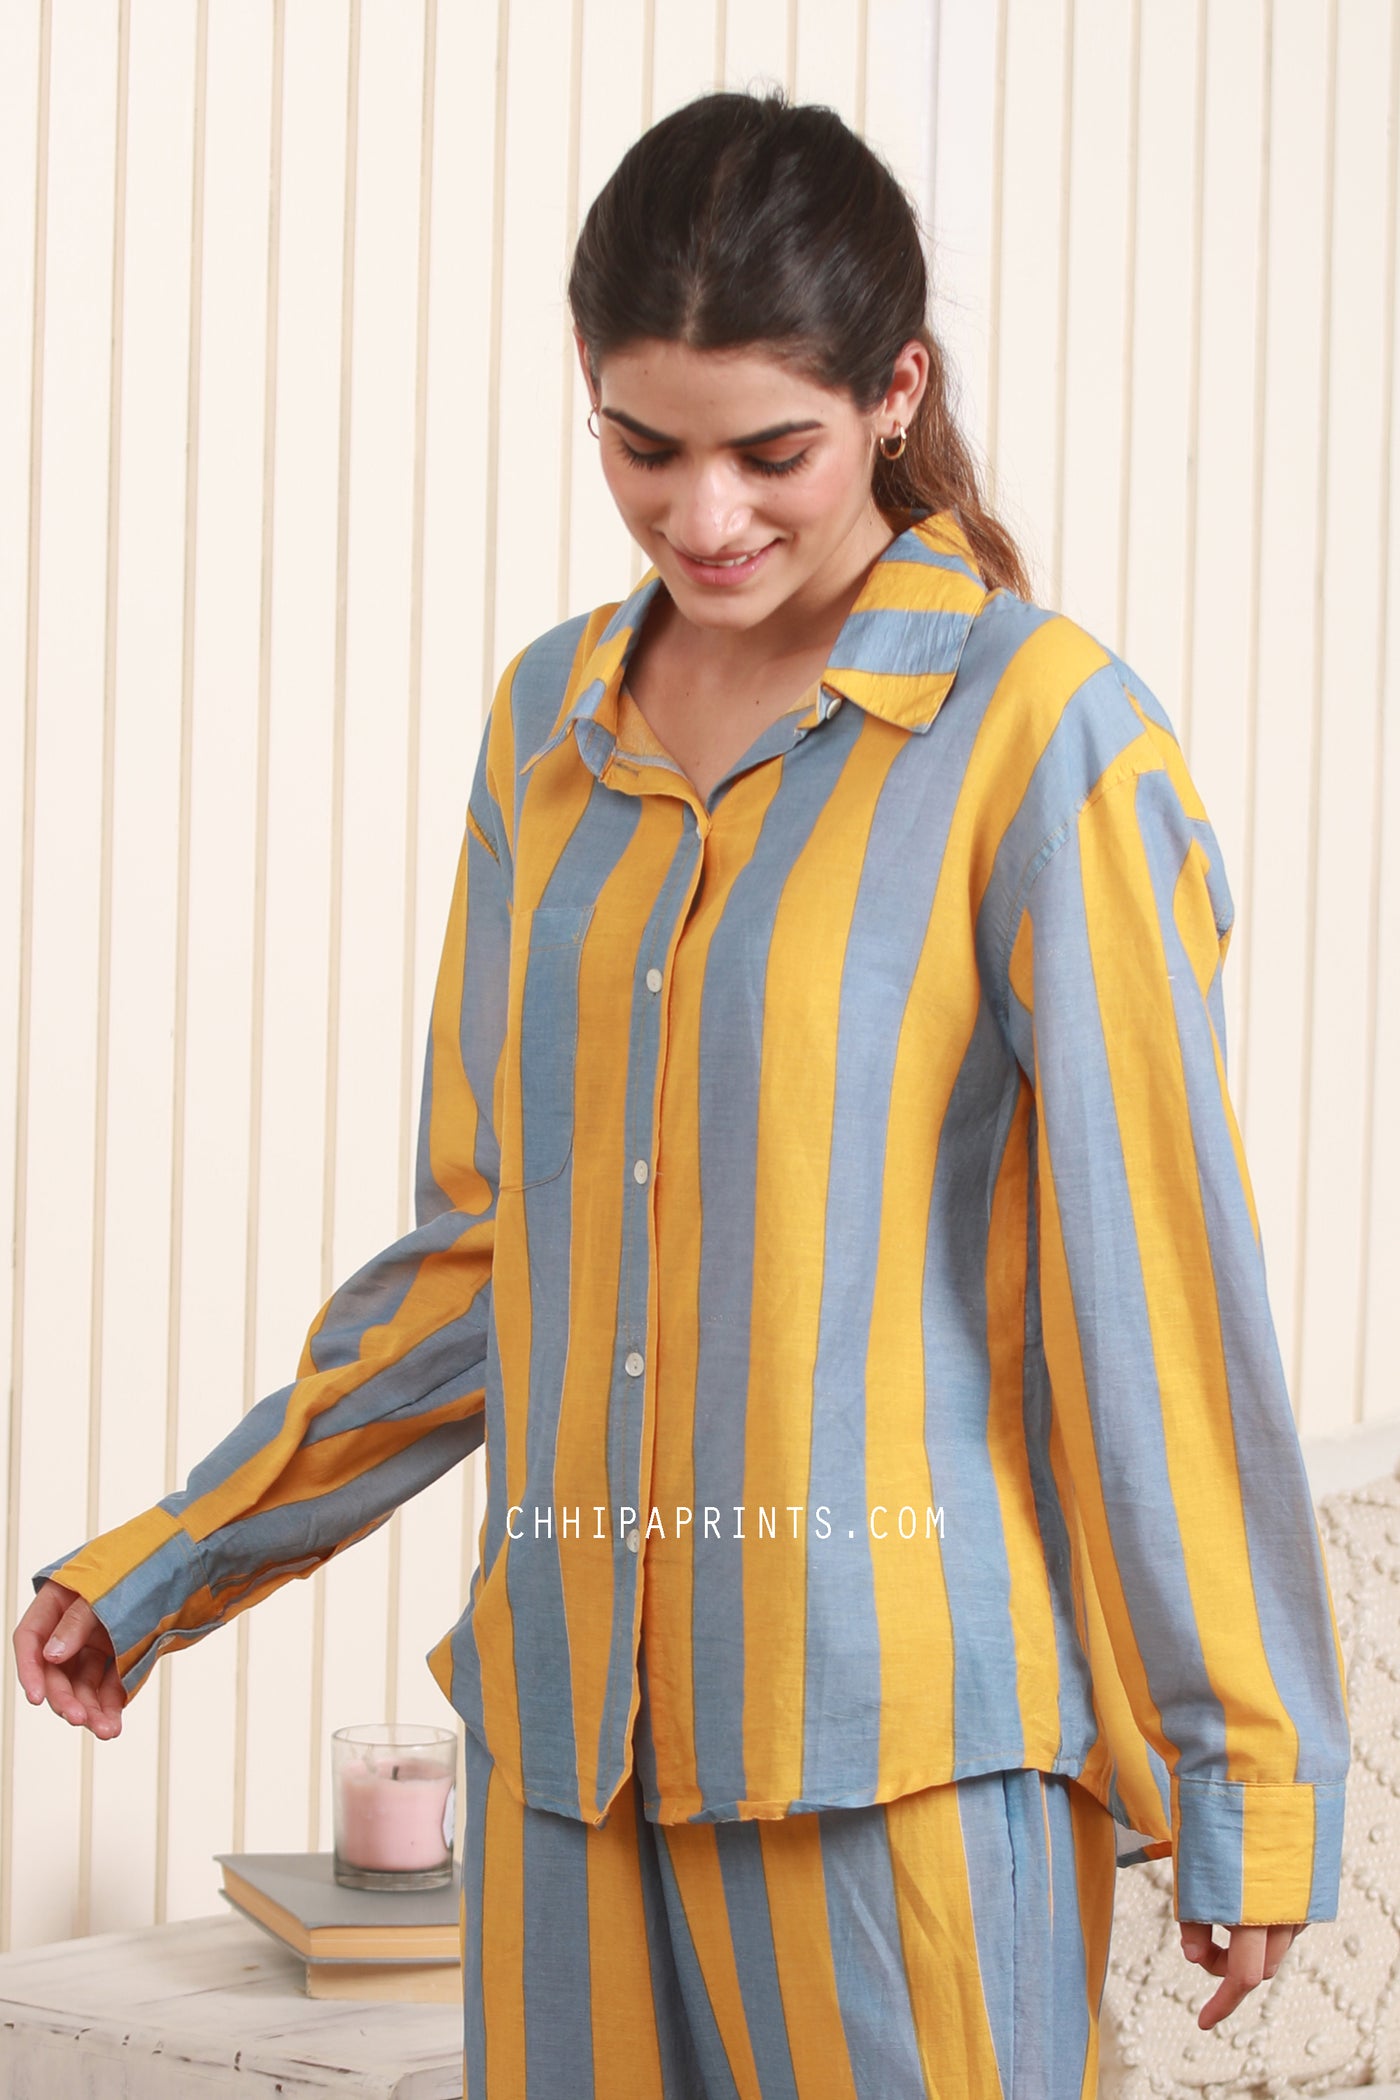 Cotton Stripe Print Co Ord Set in Shades of Turmeric Yellow and Grey